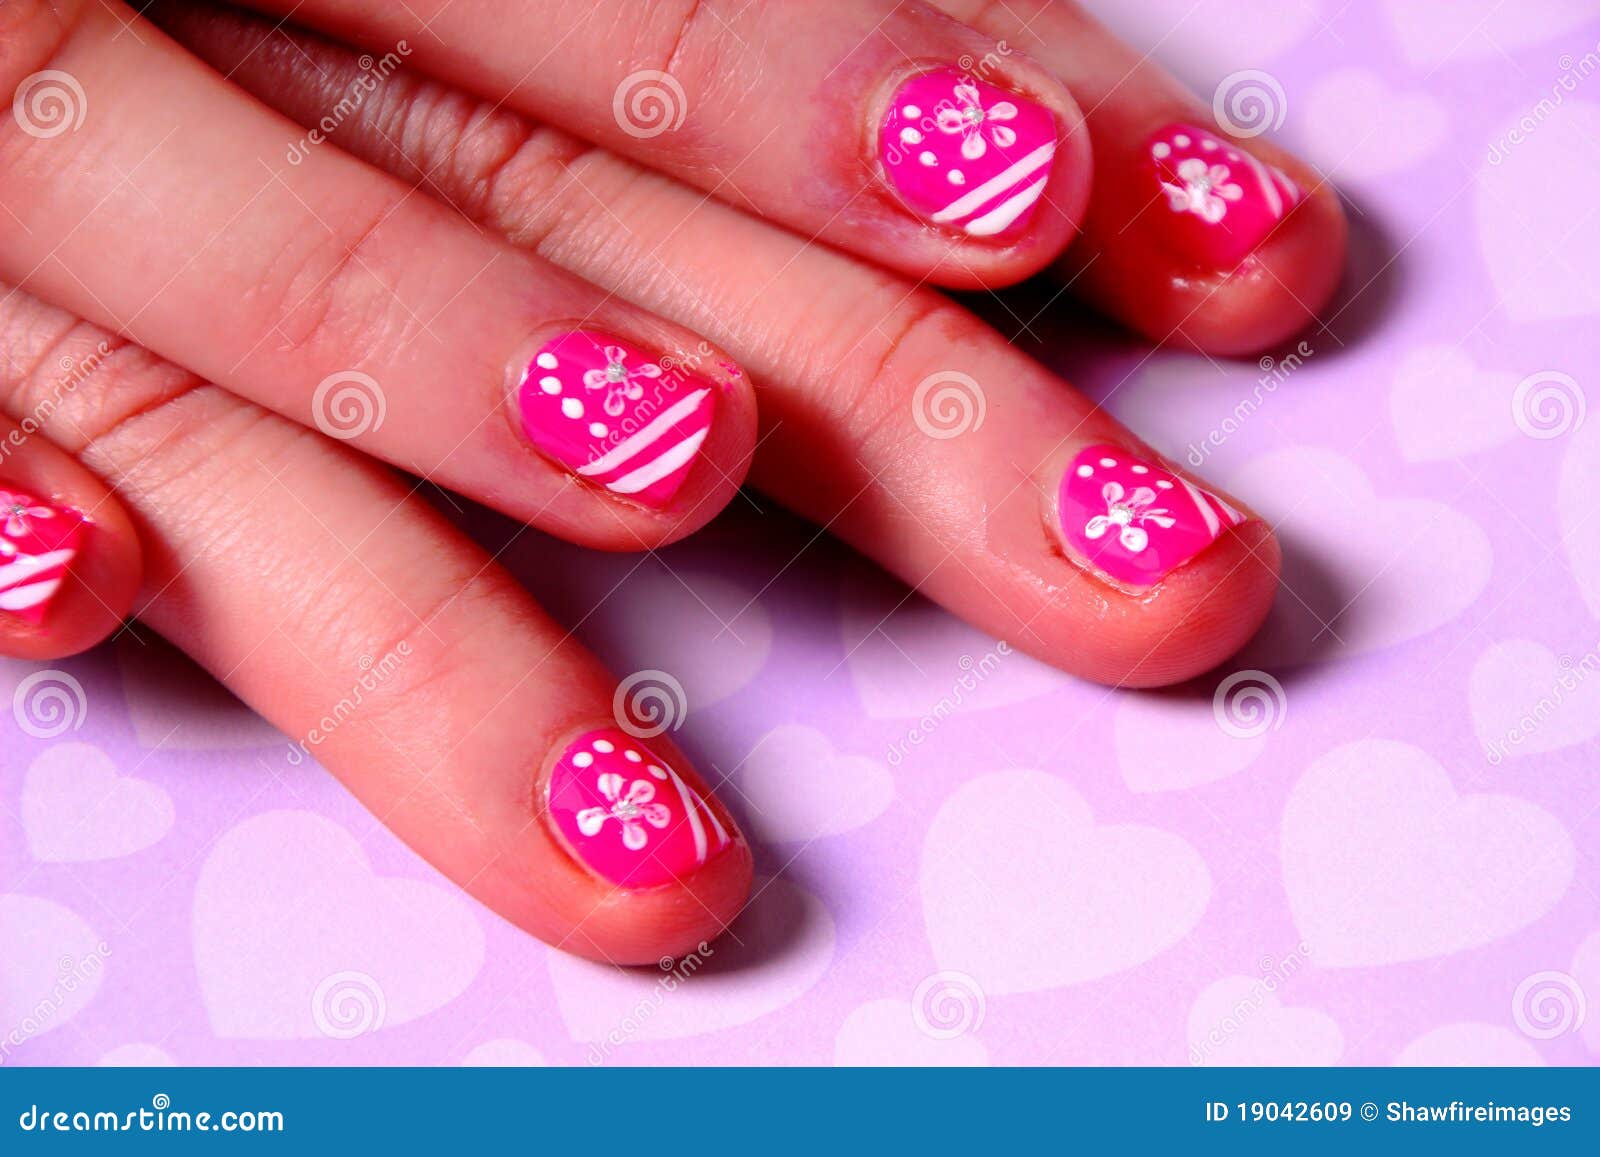 Raw Nail Art Images - wide 6